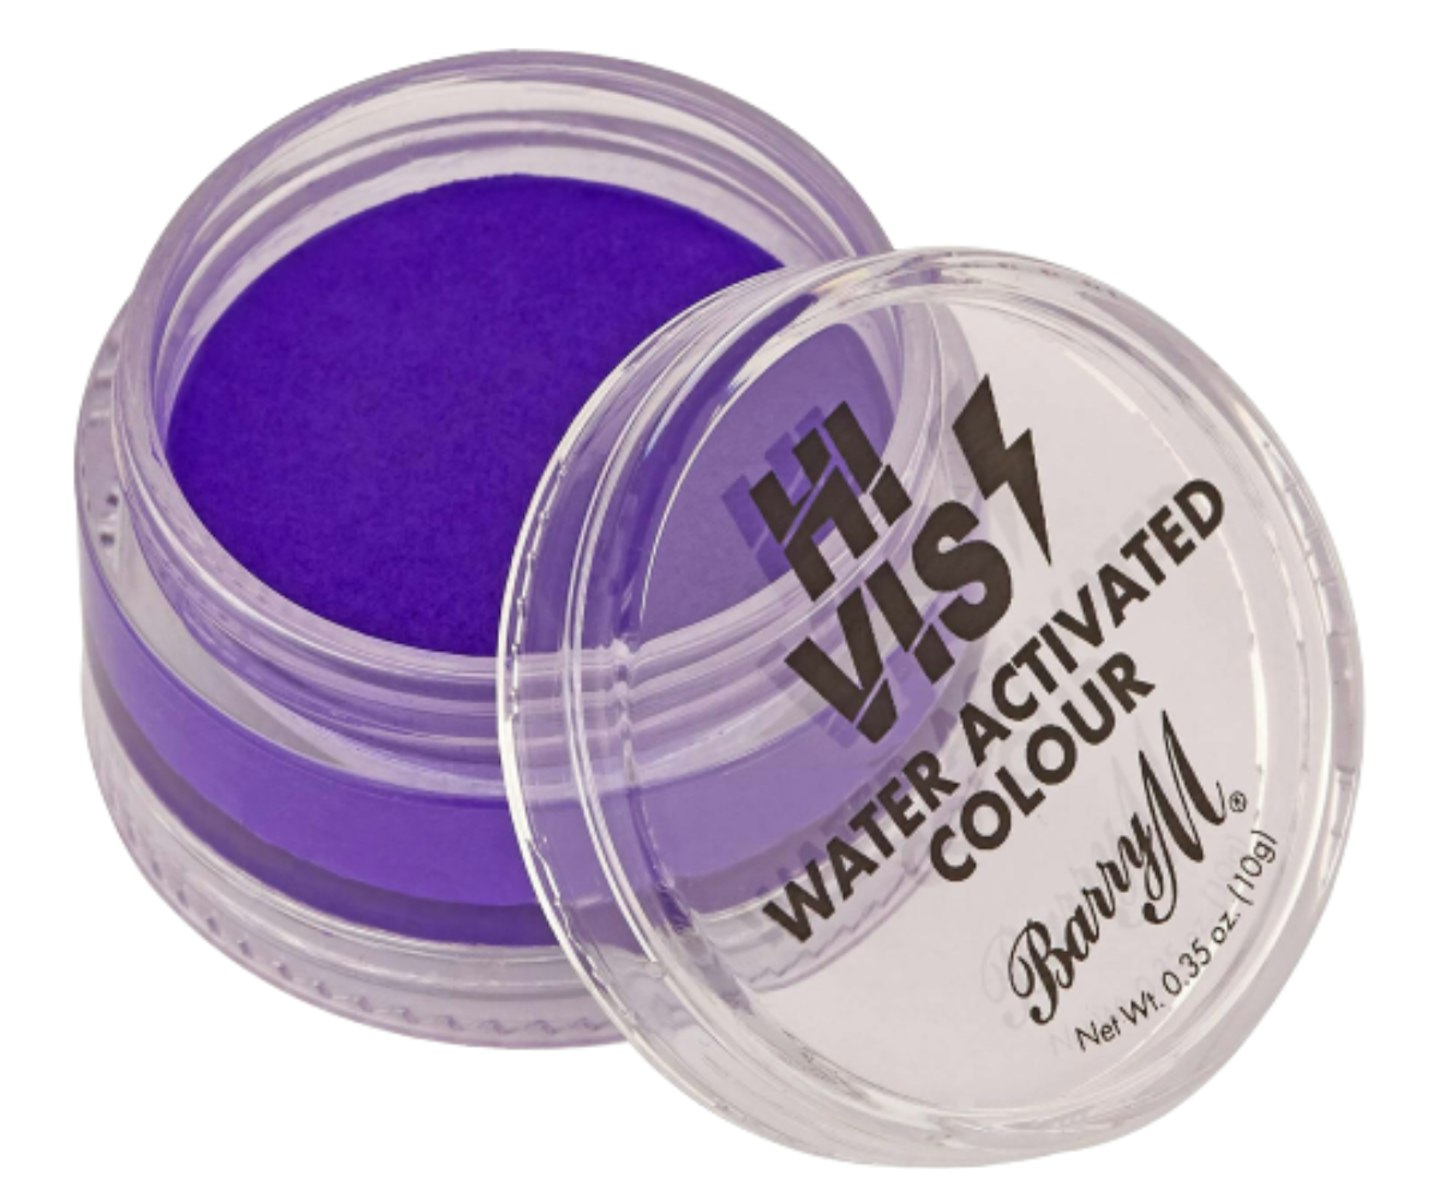 A picture of the Barry M Hi Vis Water Activated Colour in the shade Wavelength.